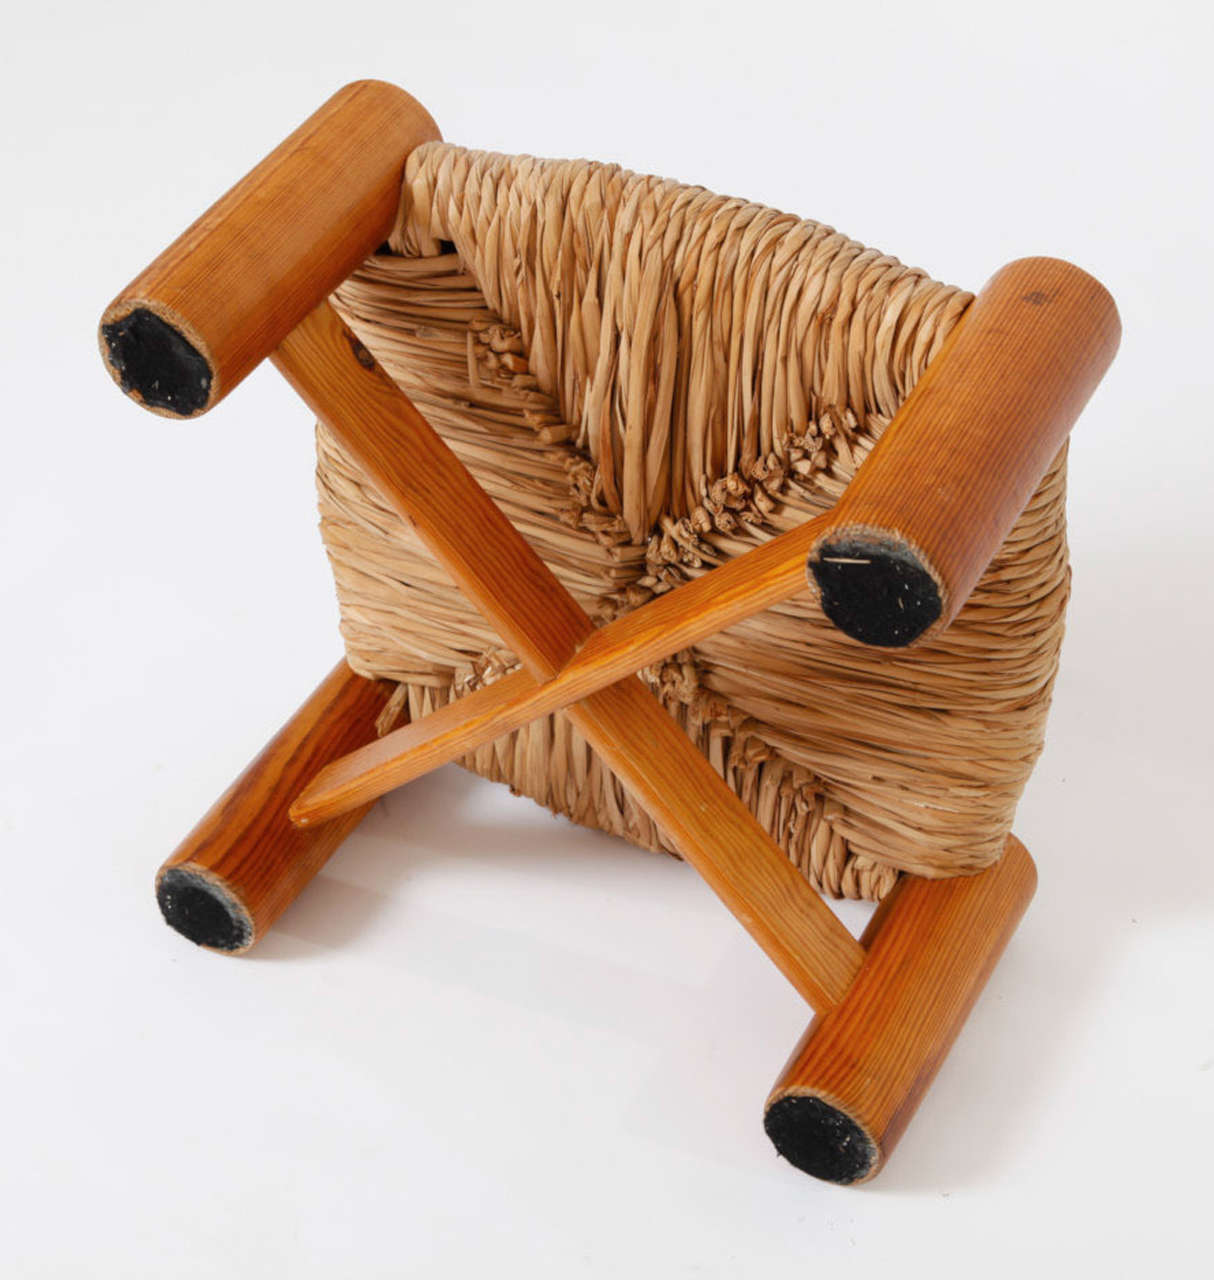 Pine One stool in the style of Charlotte Perriand